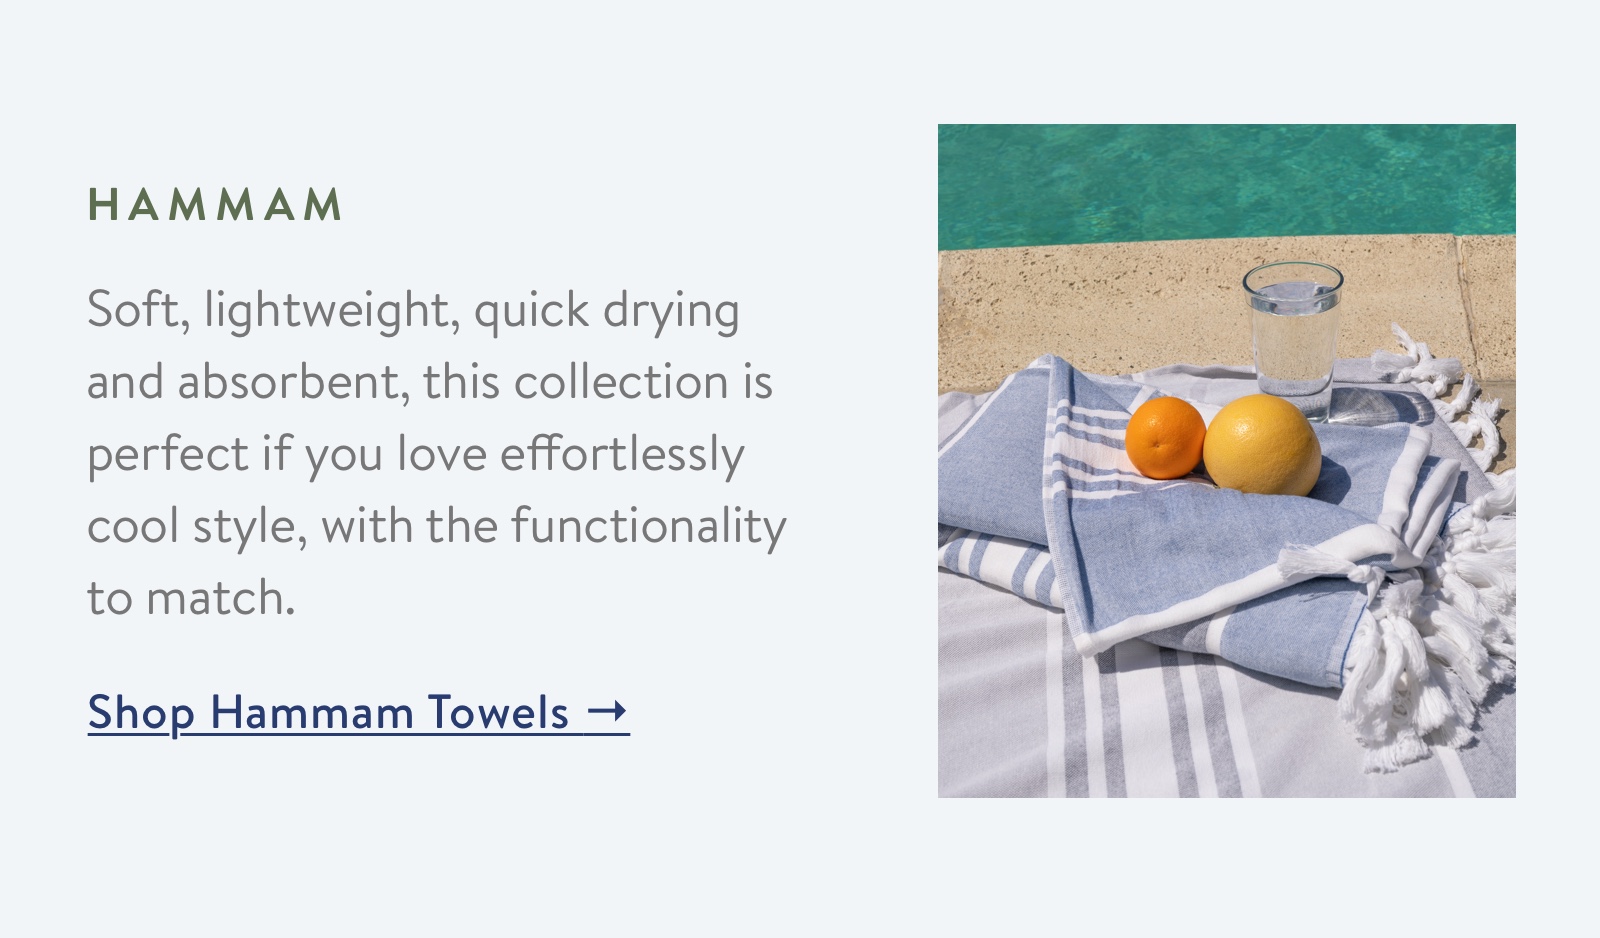 Soft, lightweight, quick drying and absorbent, this collection is perfect if you love effortlessly cool style, with the functionality to match.